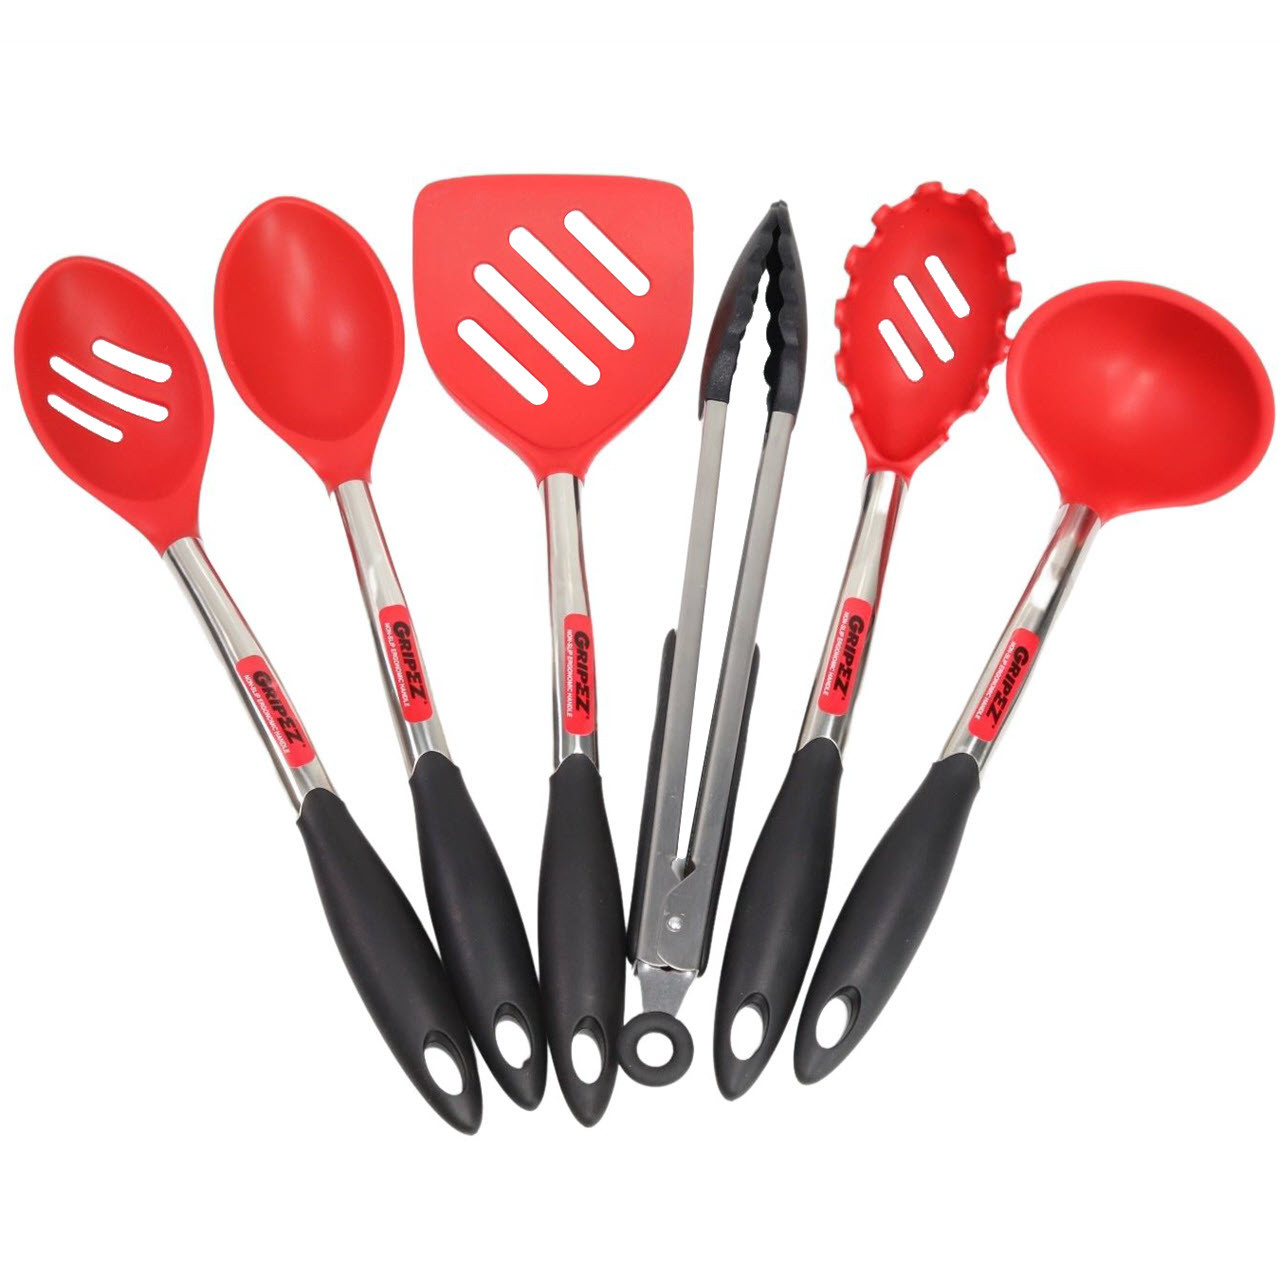 https://cdn11.bigcommerce.com/s-21kj3ntgv1/images/stencil/1280x1280/products/480/1670/Norpro-Grip-EZ-Silicone-and-Stainless-Steel-Utensil-Set__60924.1617911464.jpg?c=2